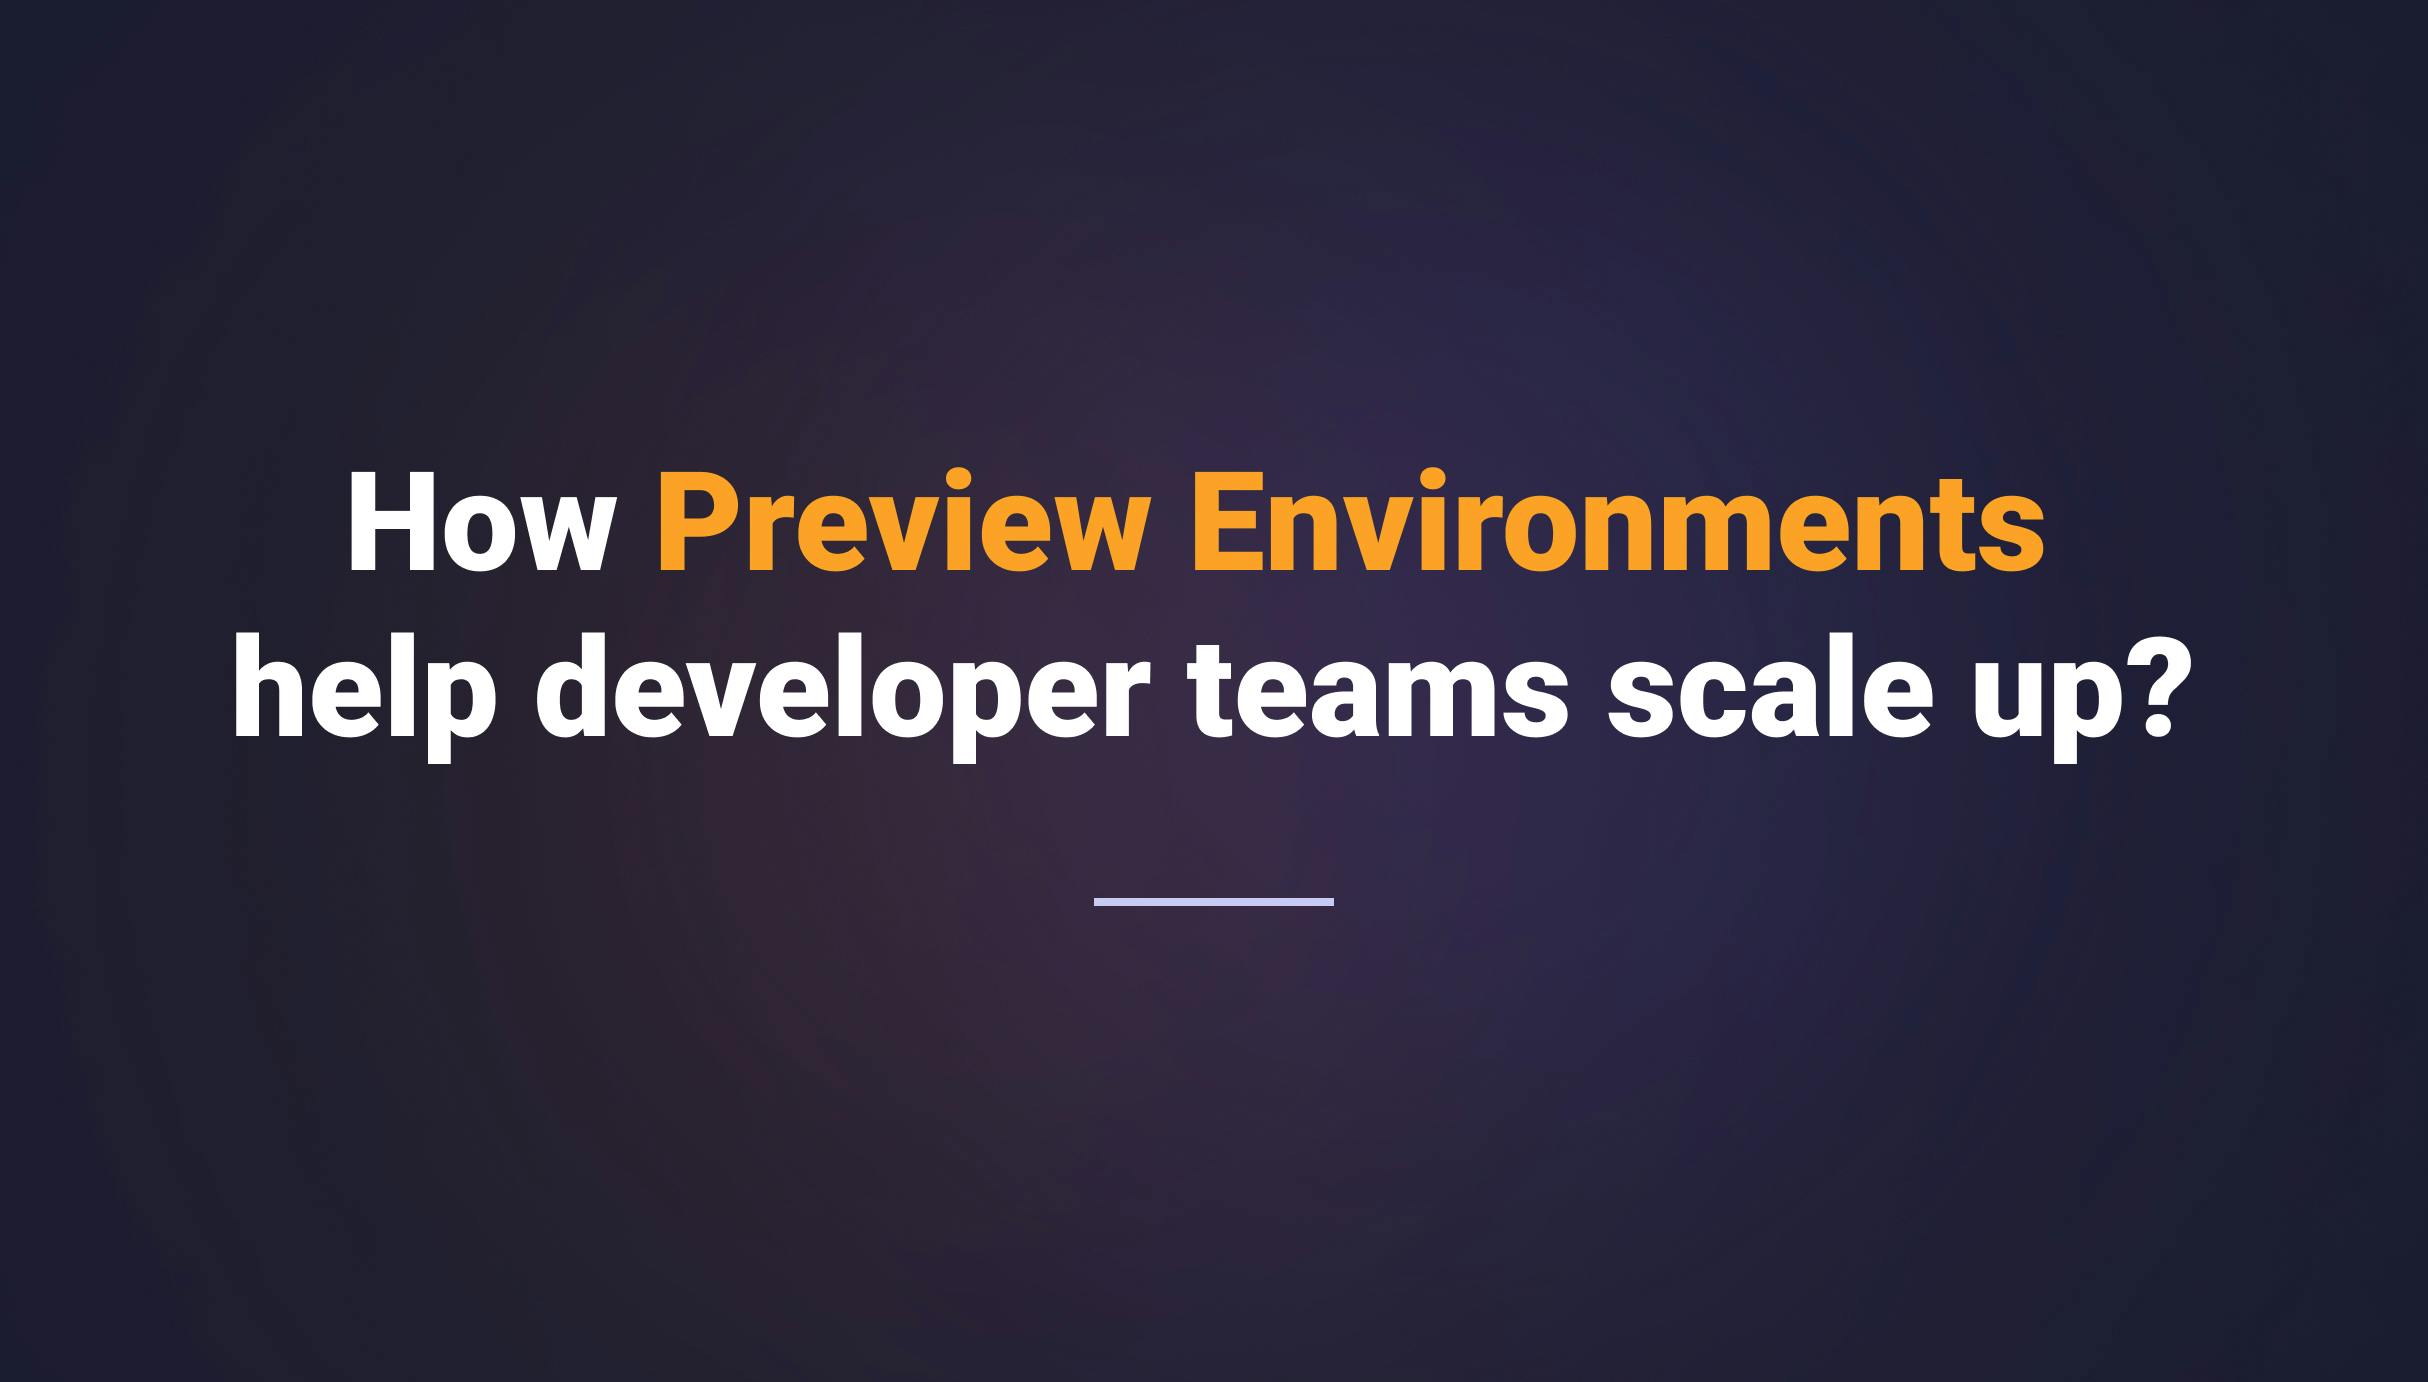 How Preview Environments help developer teams scale up?  - Qovery